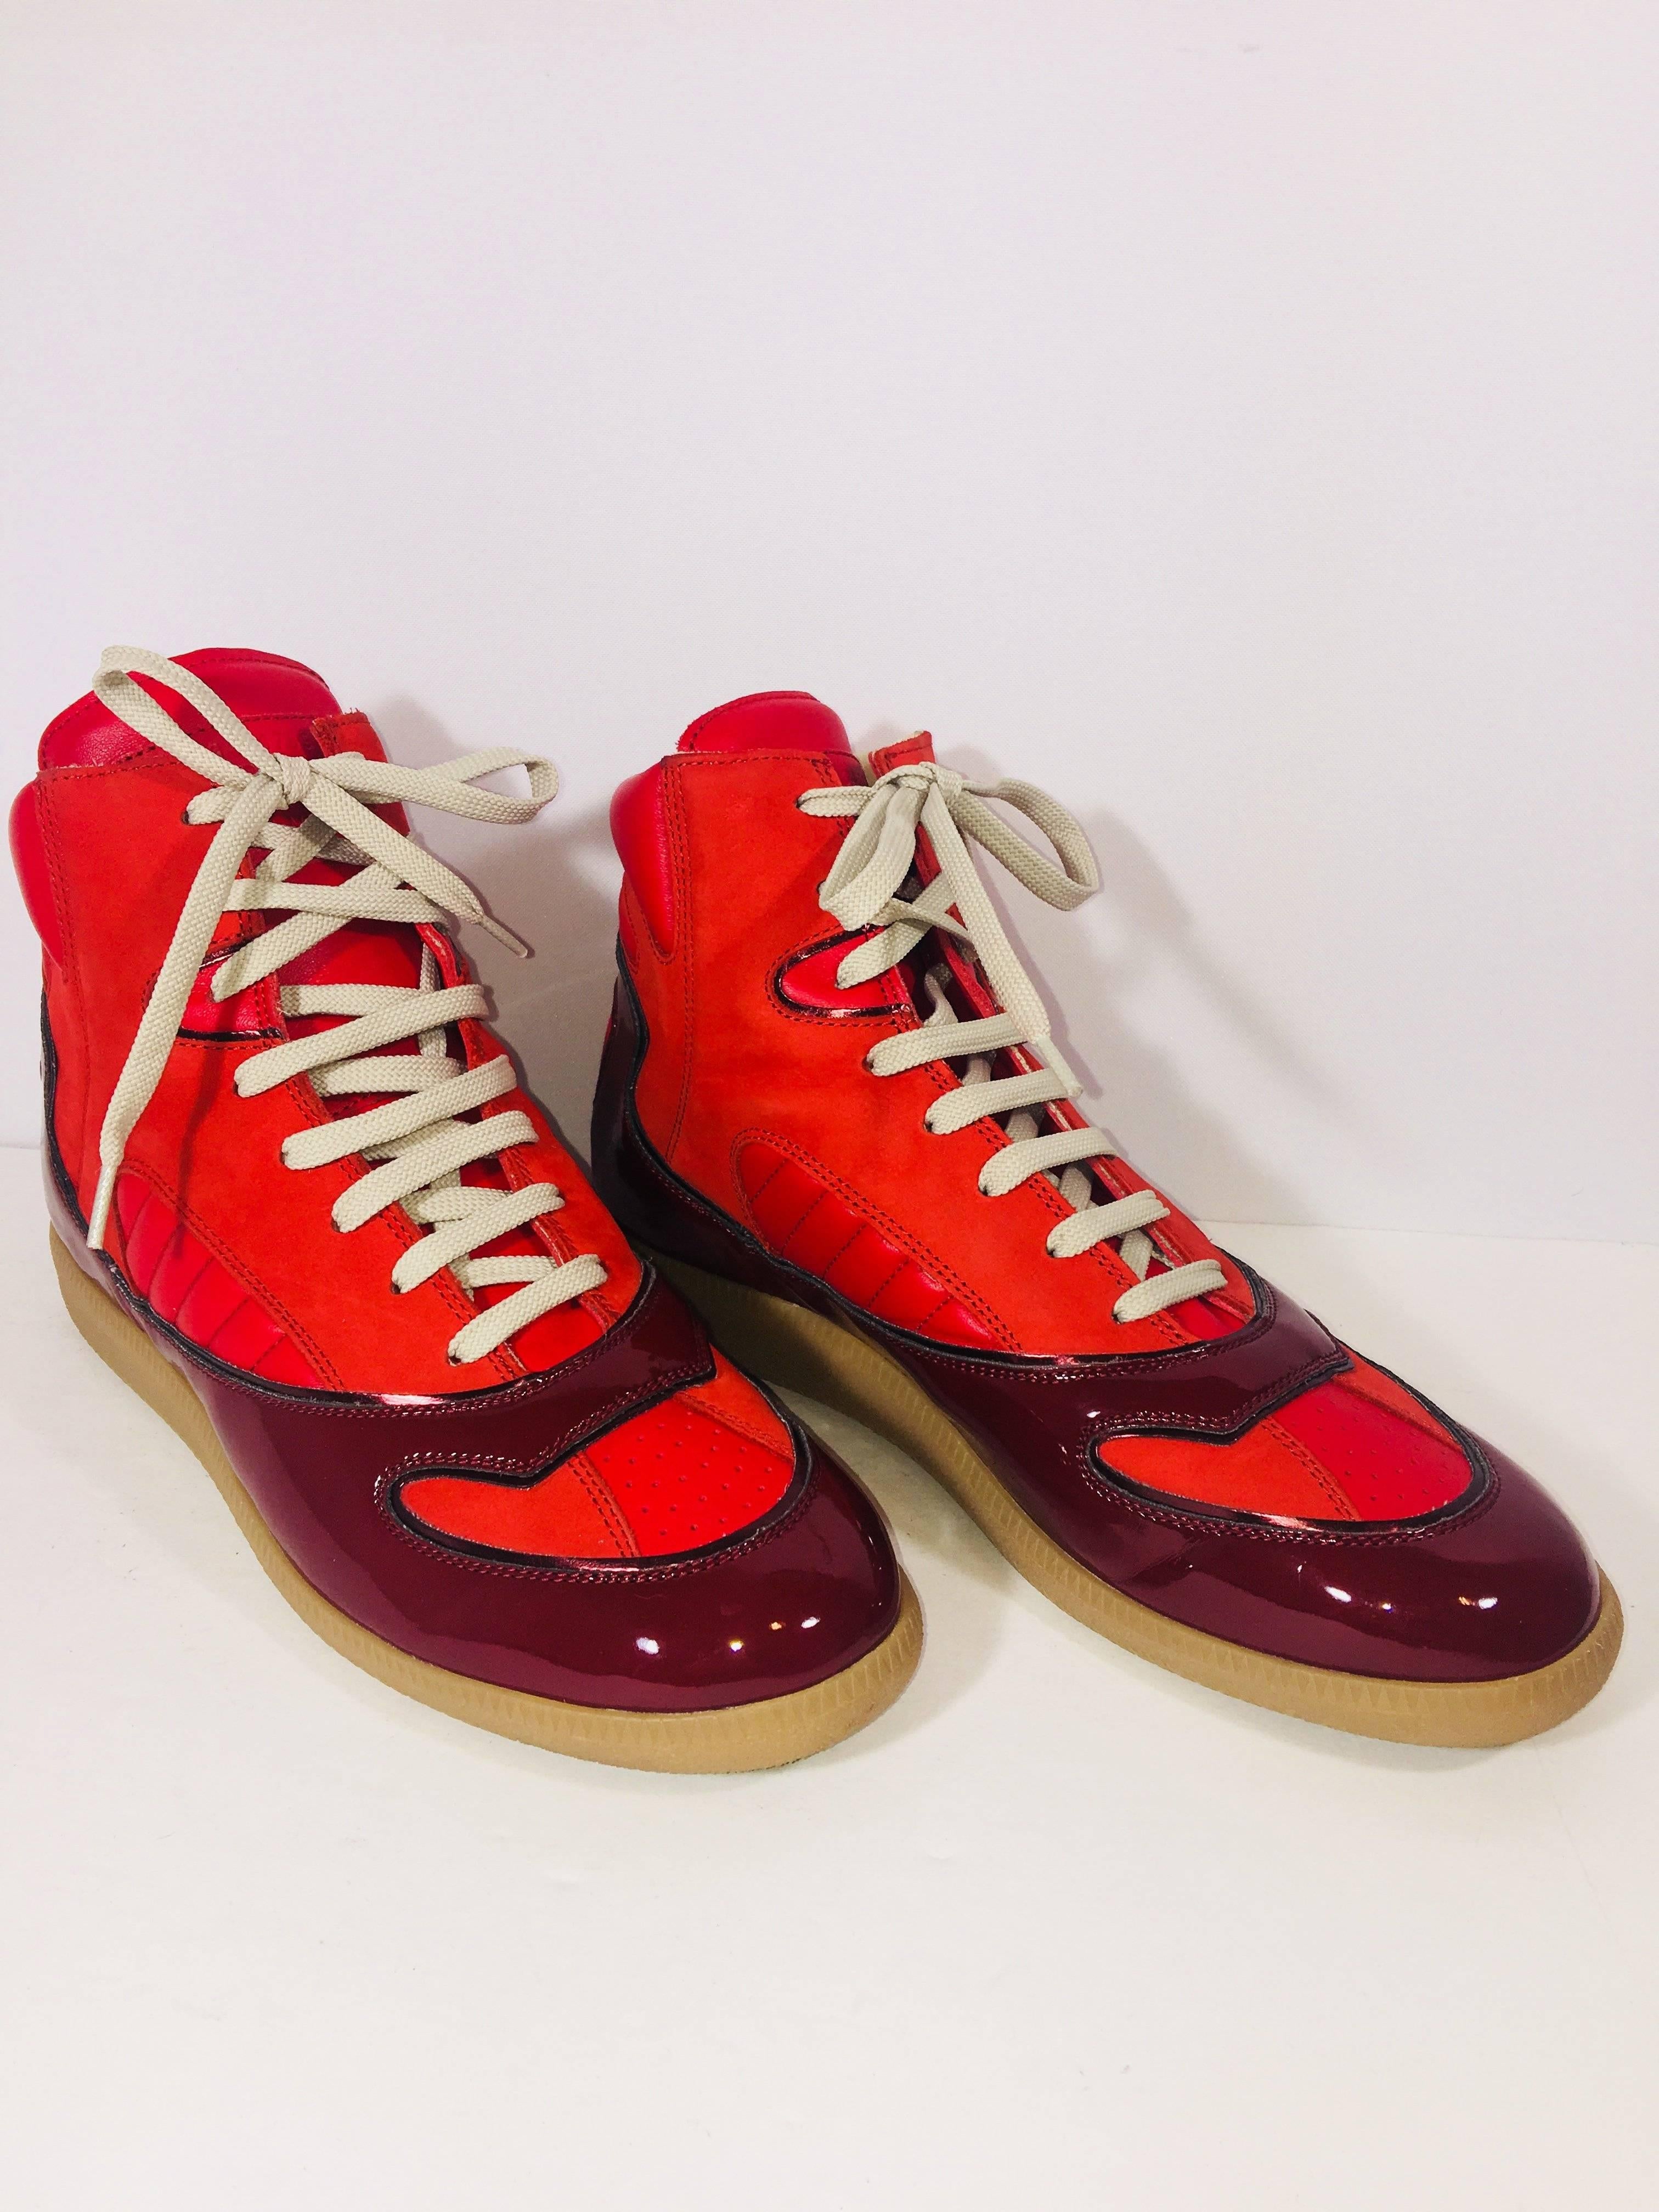 Maison Margiela High Top Sneakers in Red Patent Leather 